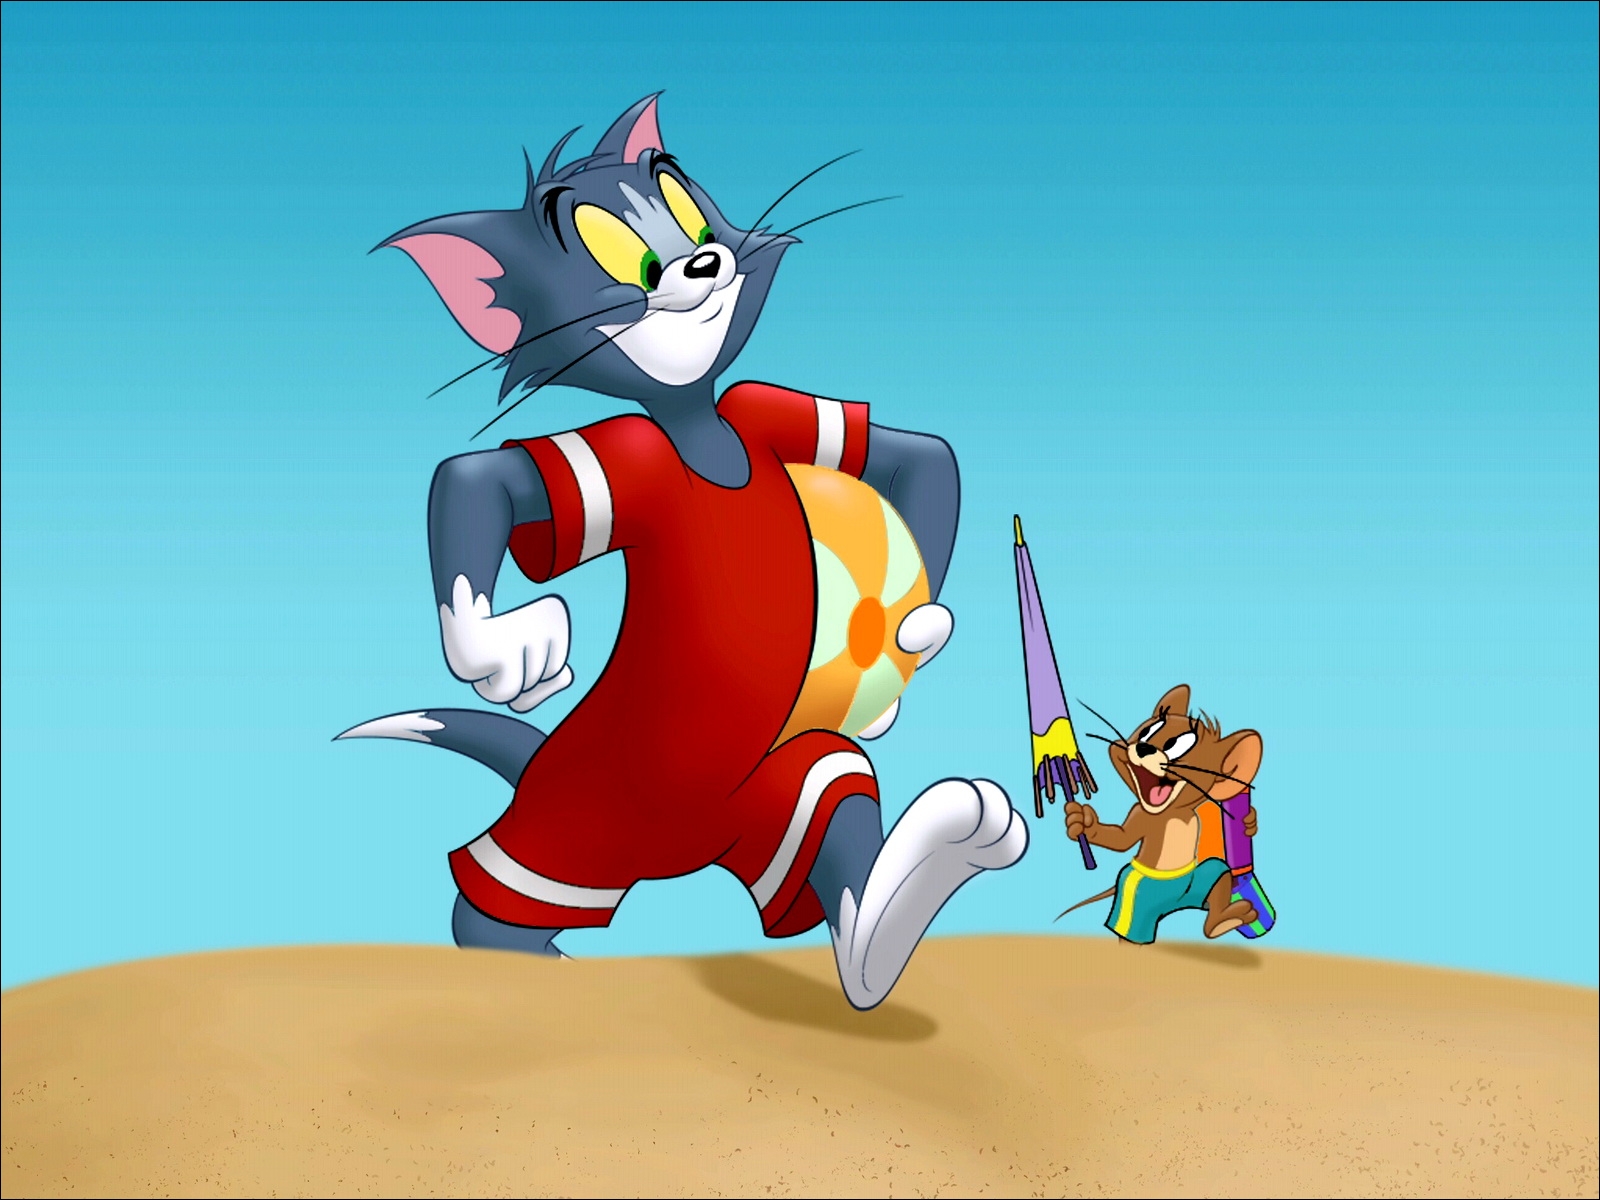 Hot nude tom and jerry pice